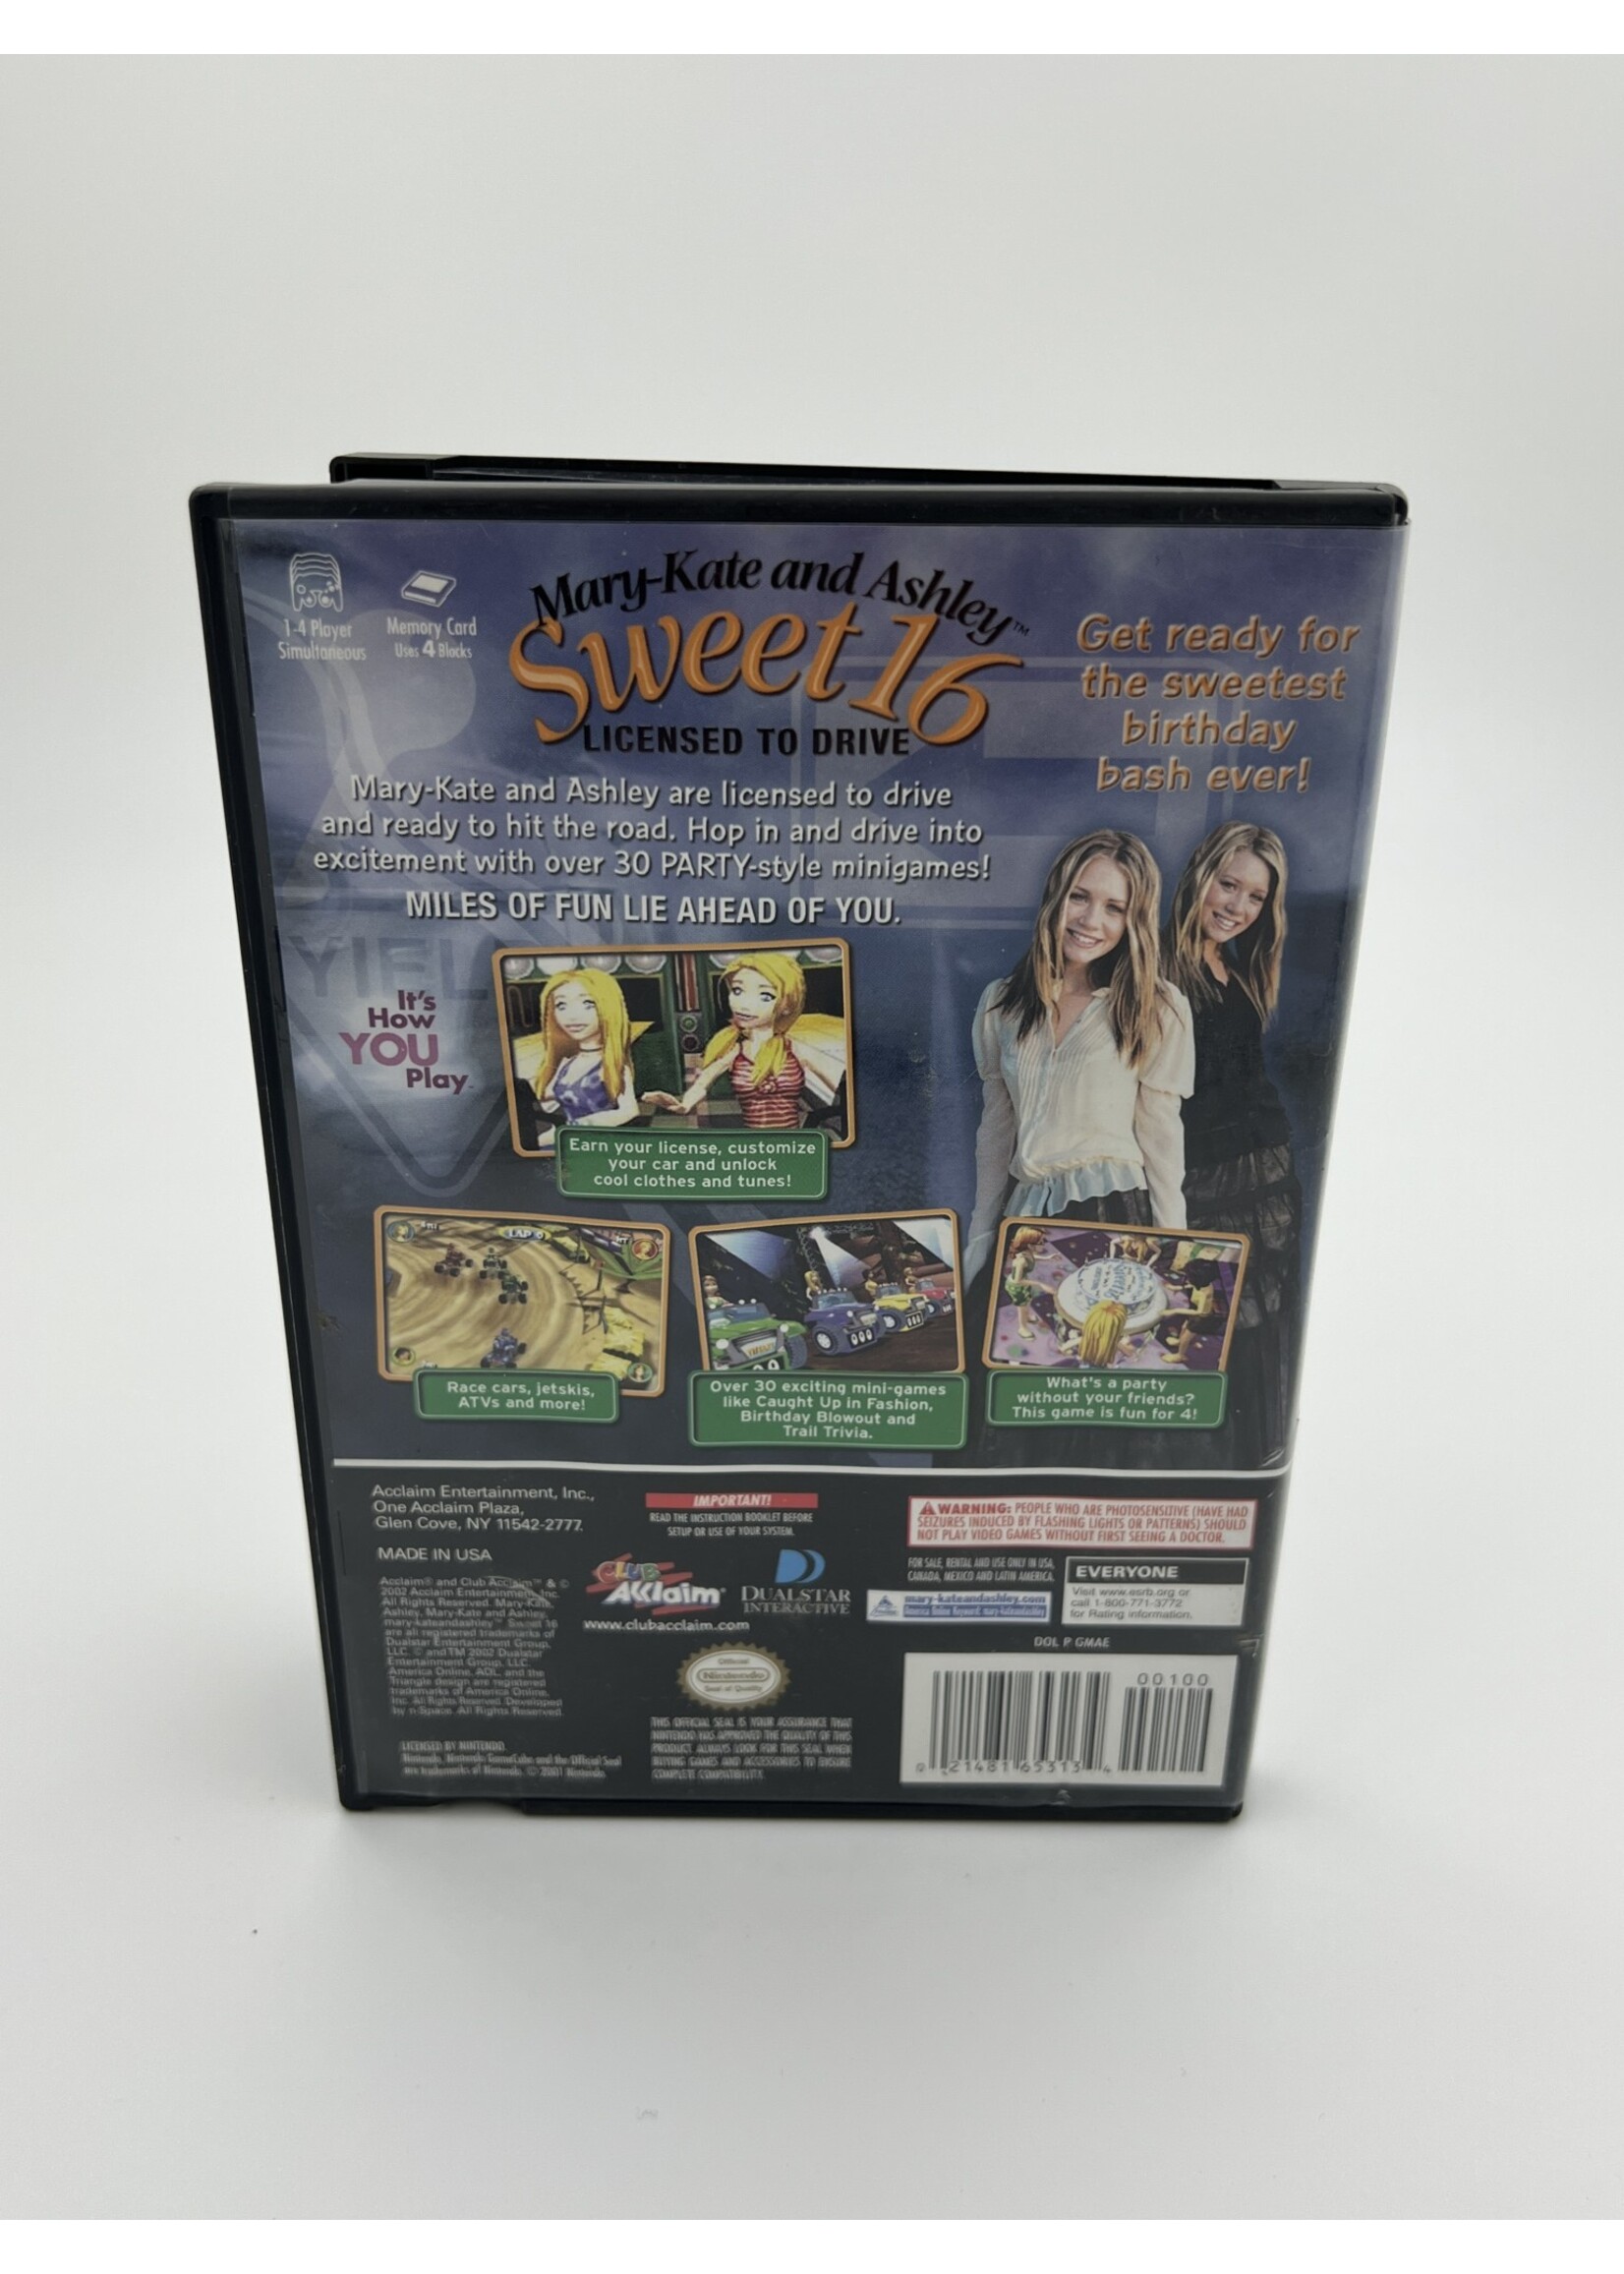 Nintendo Mary Kate And Ashley Sweet 16 Licensed To Drive Gamecube